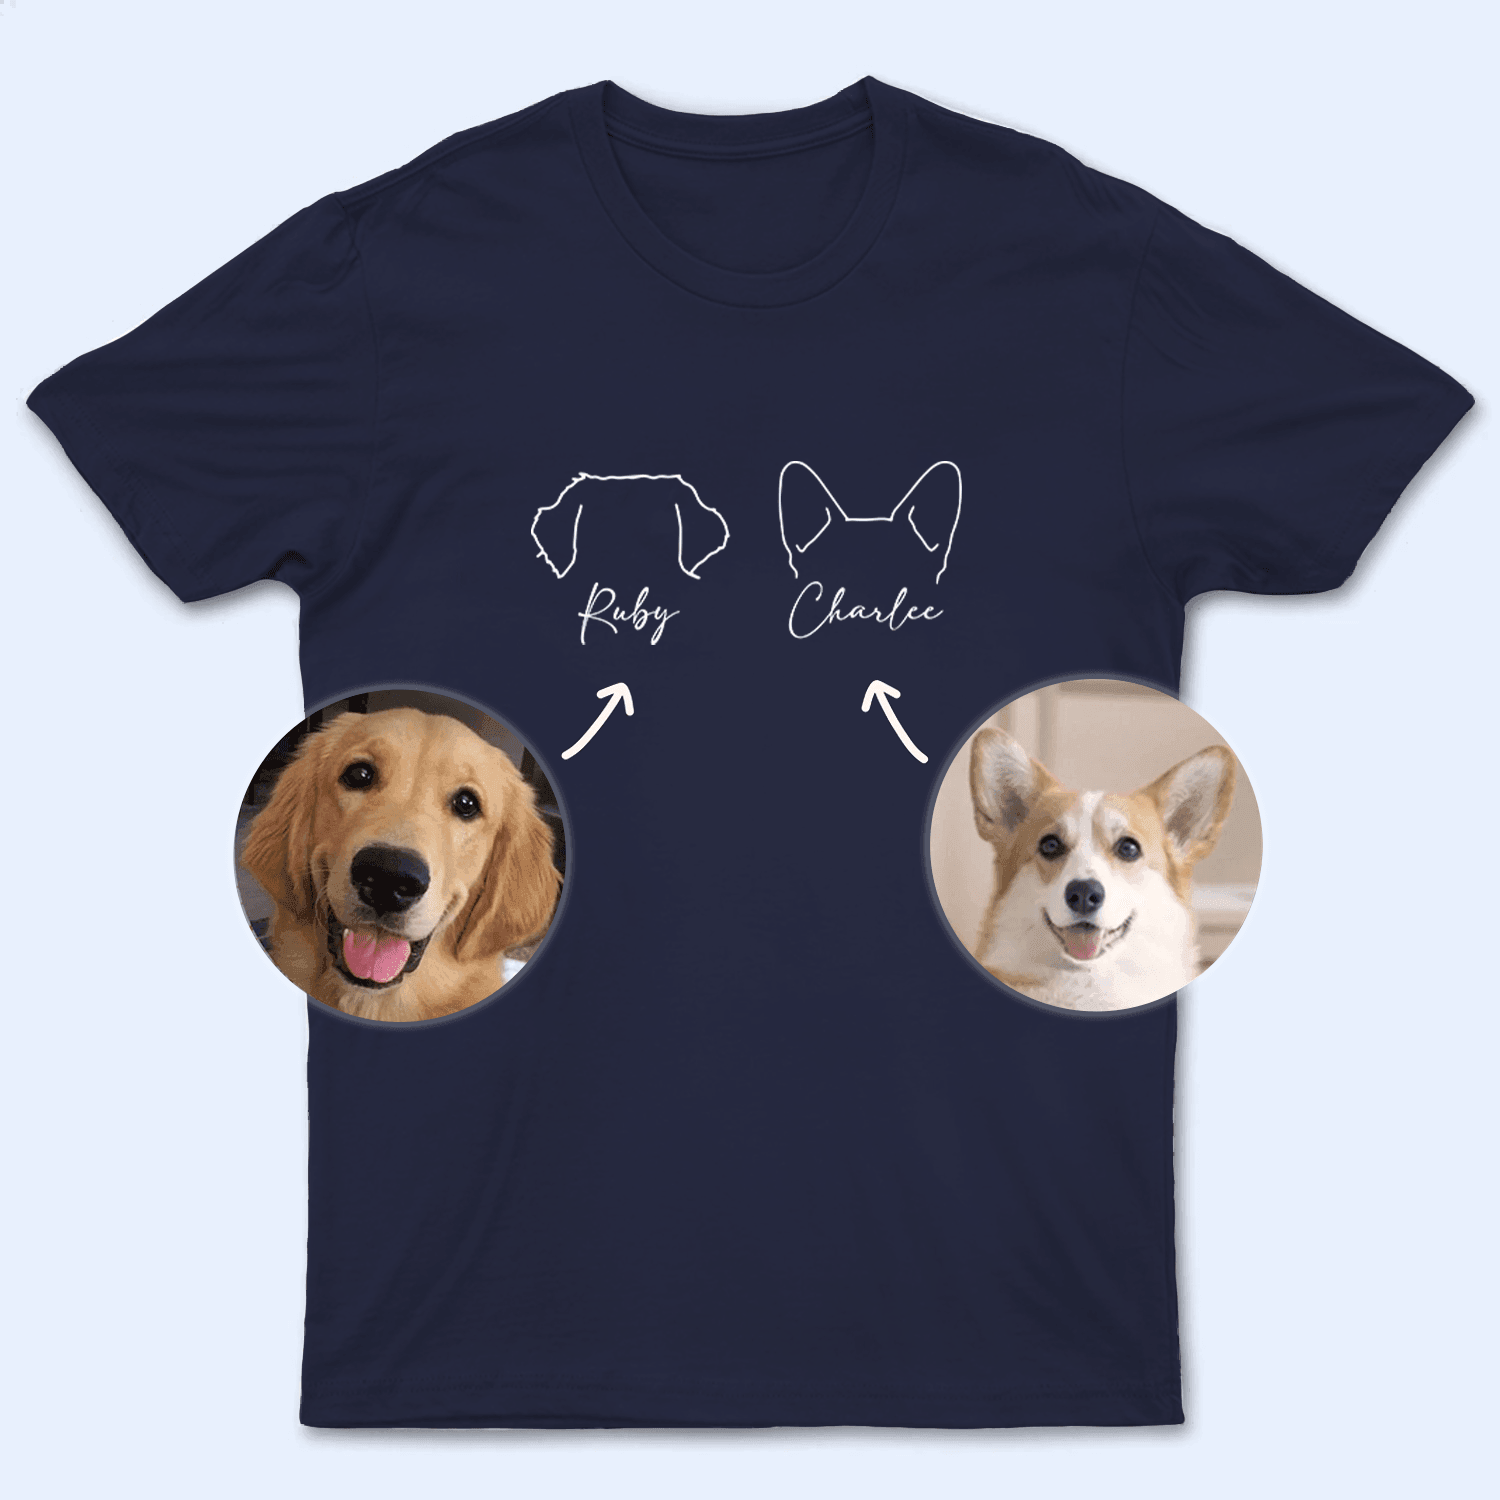 Dog Ears with Name - Personalized Custom T Shirt - Birthday, Loving, Funny Gift for Dog Mom, Dog Dad, Dog Lovers, Pet Gifts for Him, Her - Suzitee Store